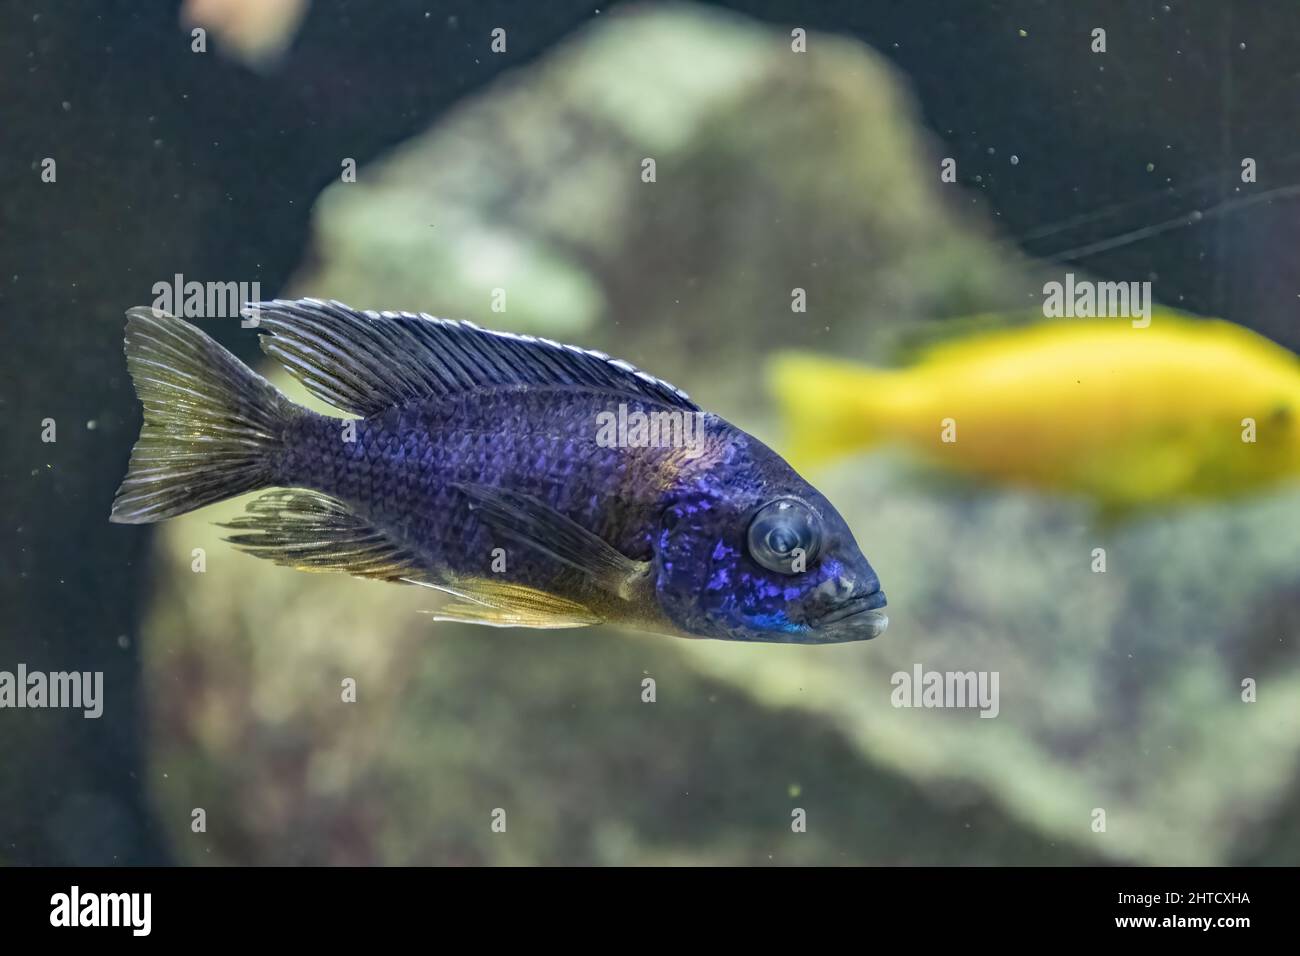 A closeup of a blue Aulonocara swimming in an aquarium against a yellow fish and a stone Stock Photo